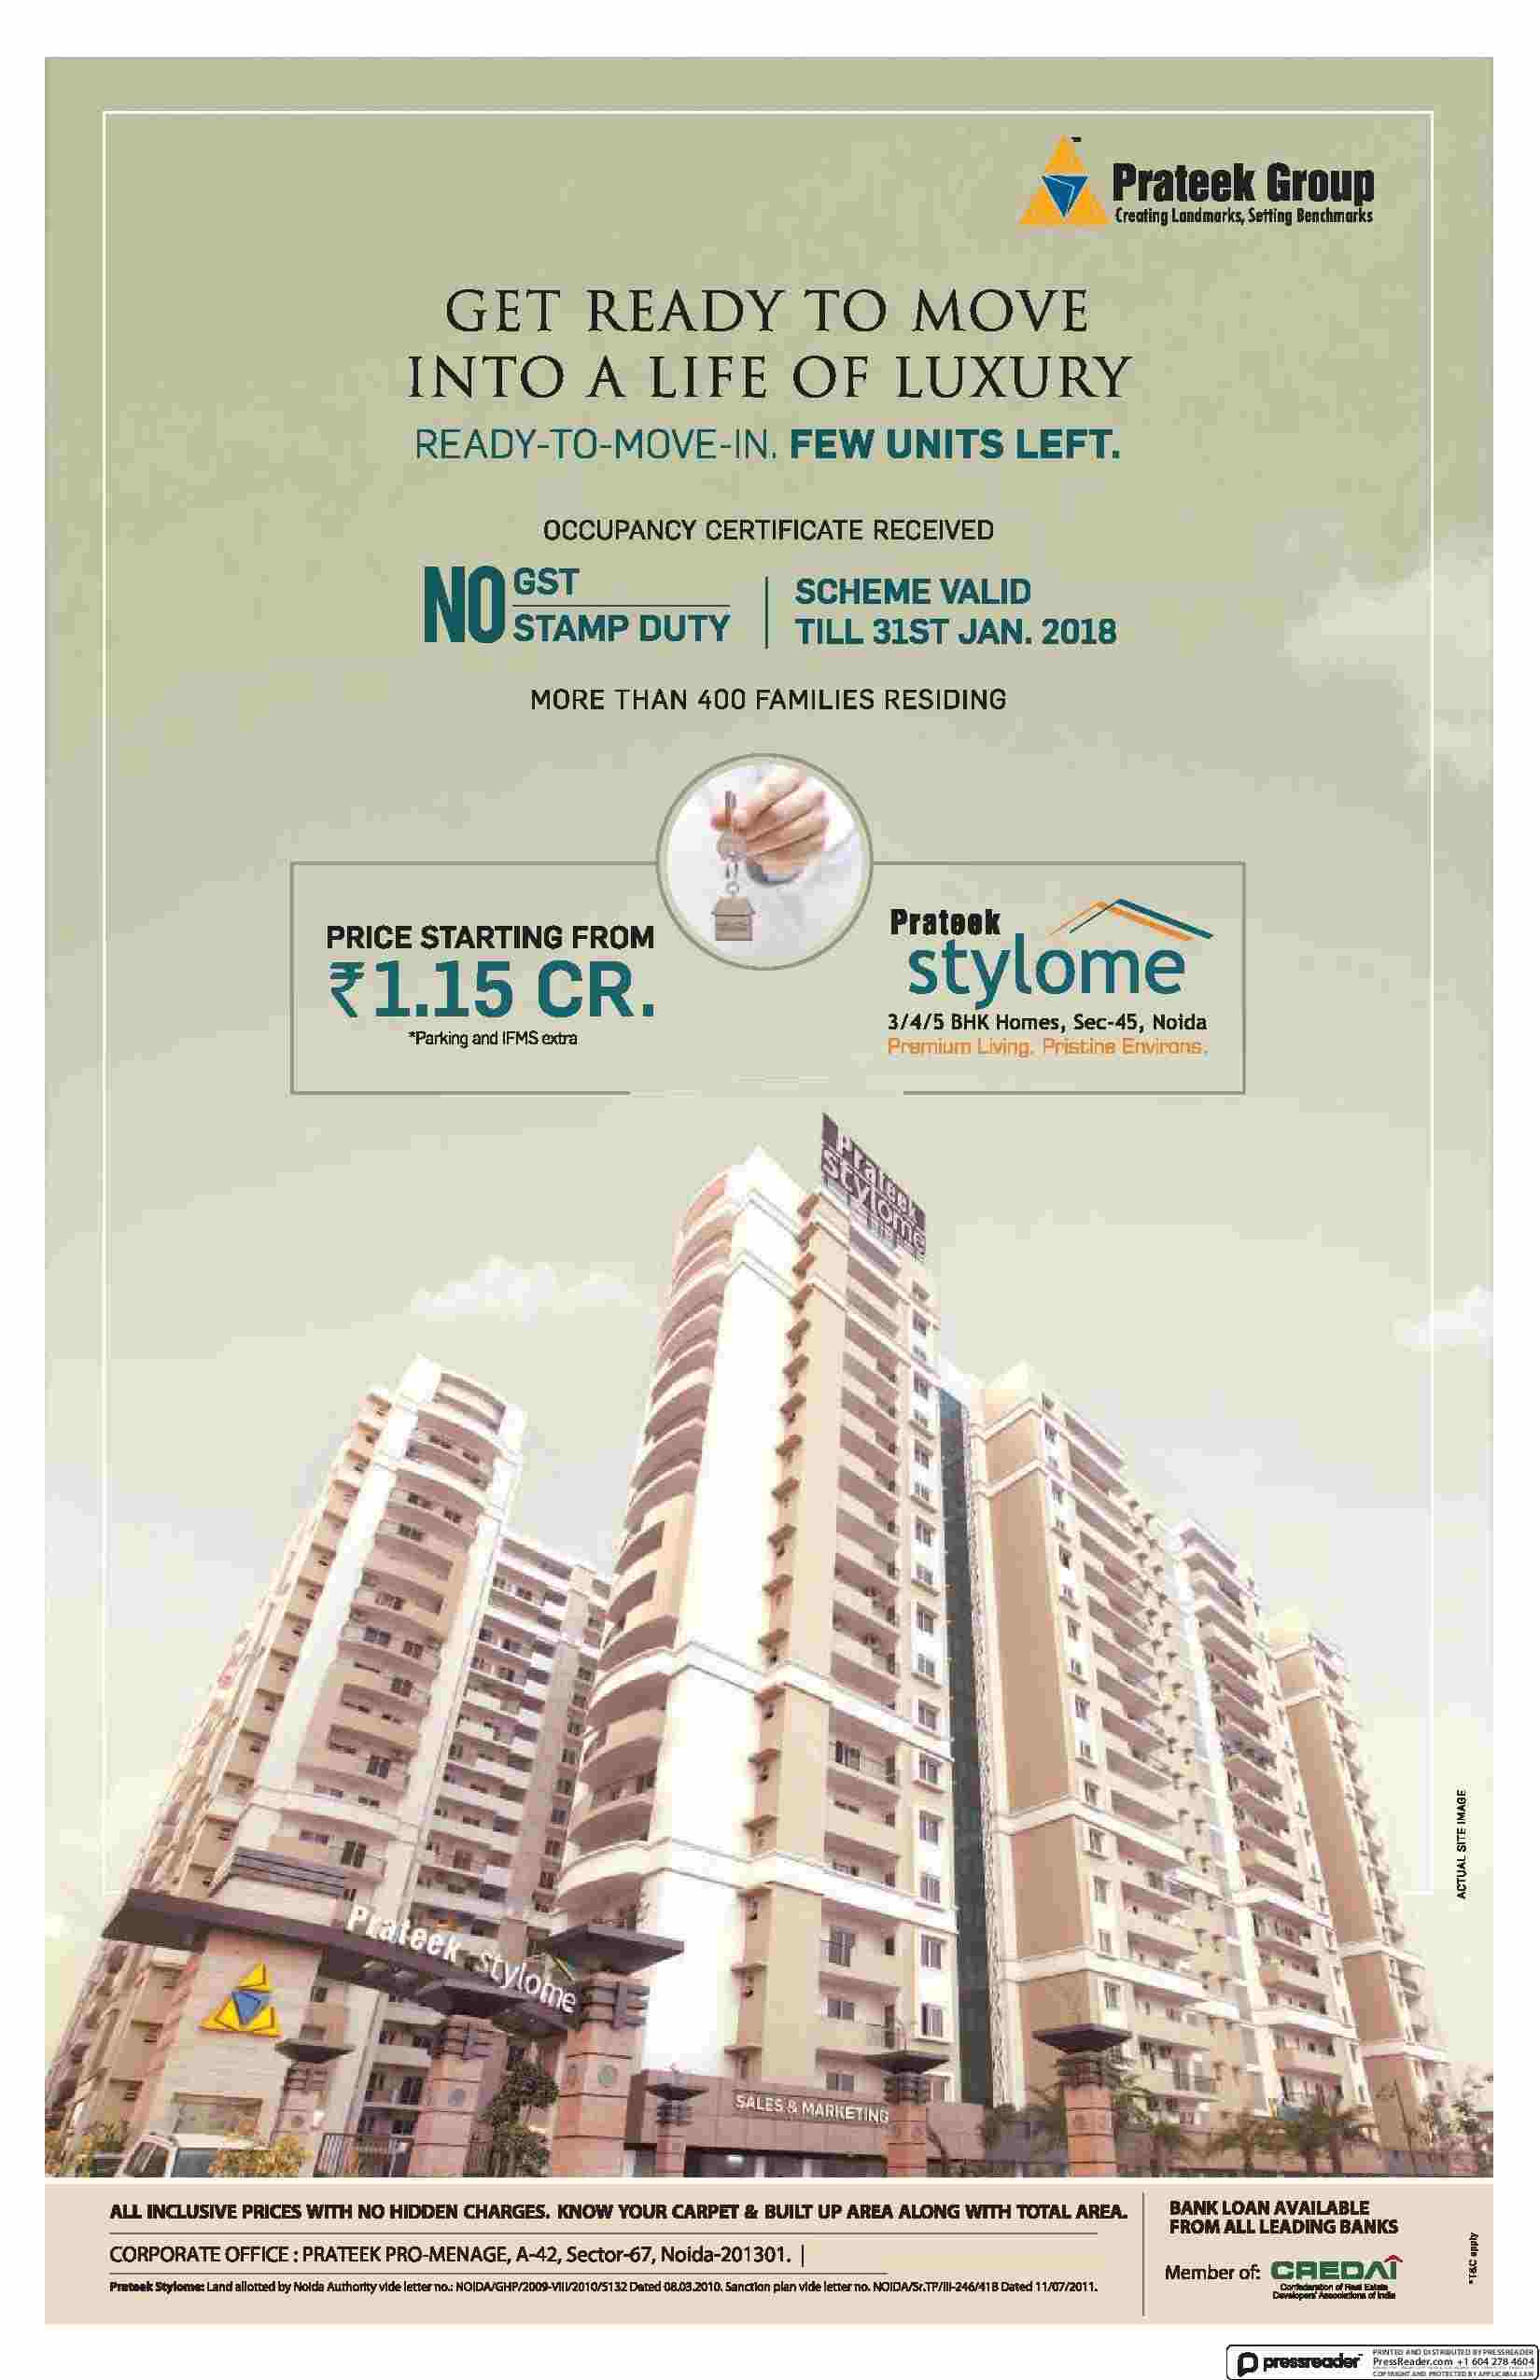 Get ready to move into a life of luxury at Prateek Stylome in Noida